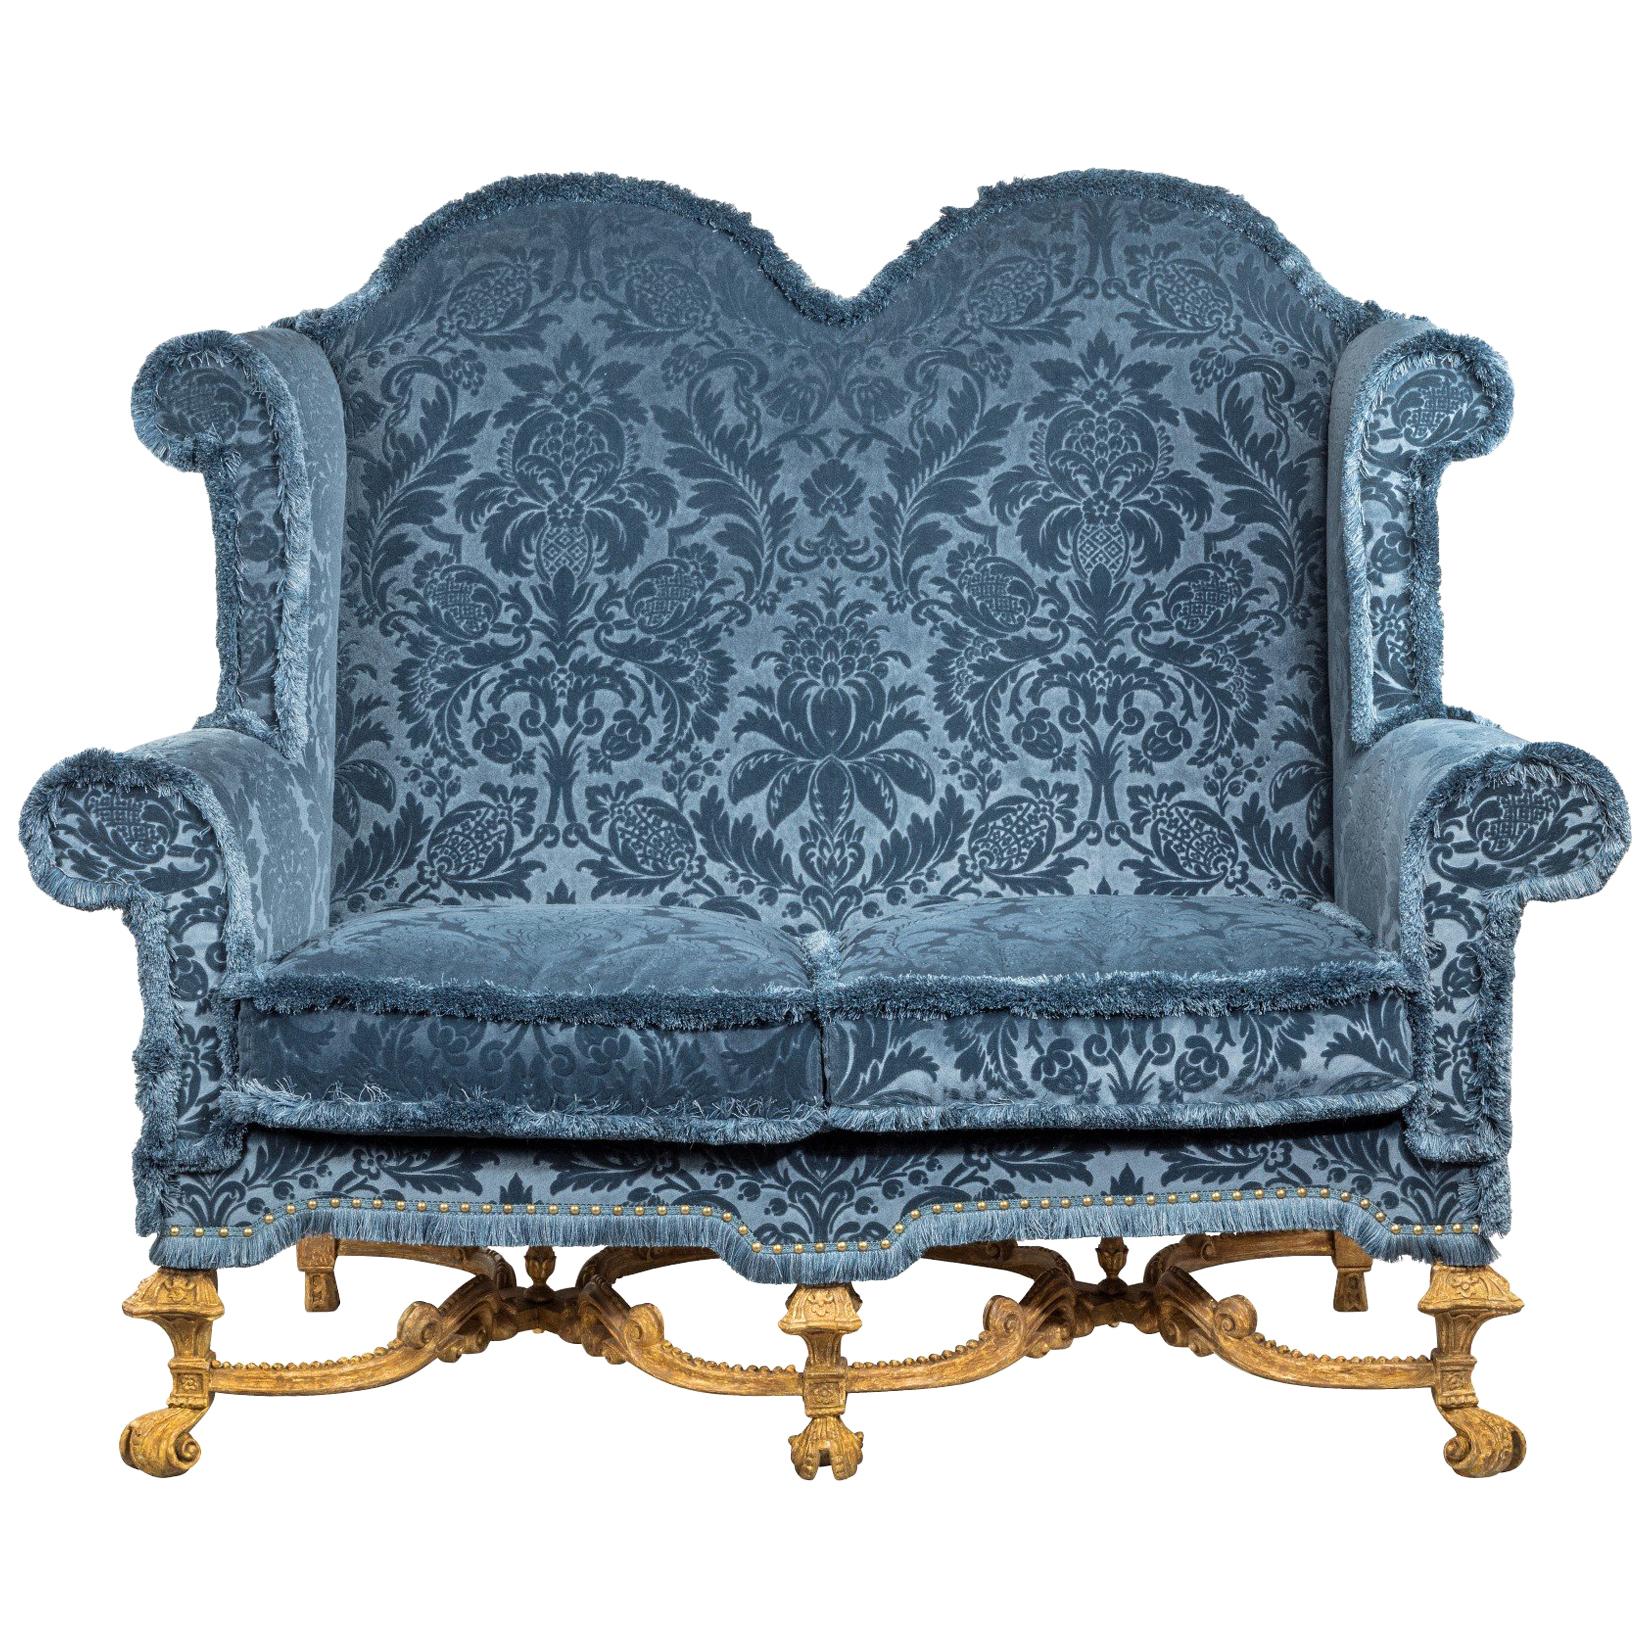 William III Baroque Carved Giltwood Settee For Sale